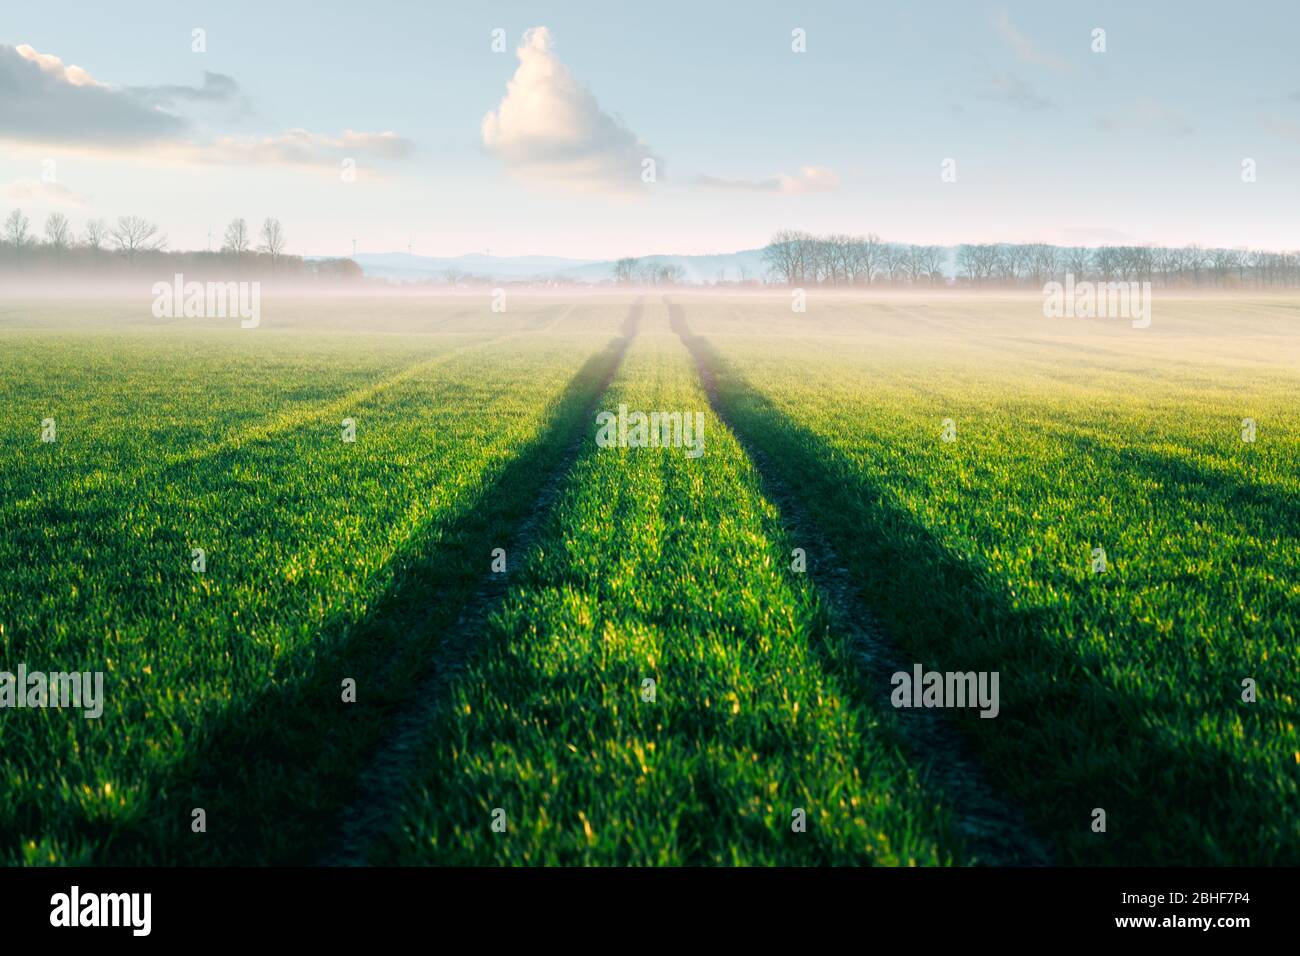 Road and green rows of young wheat on agriculture field in spring time. Nature landscape photography Stock Photo